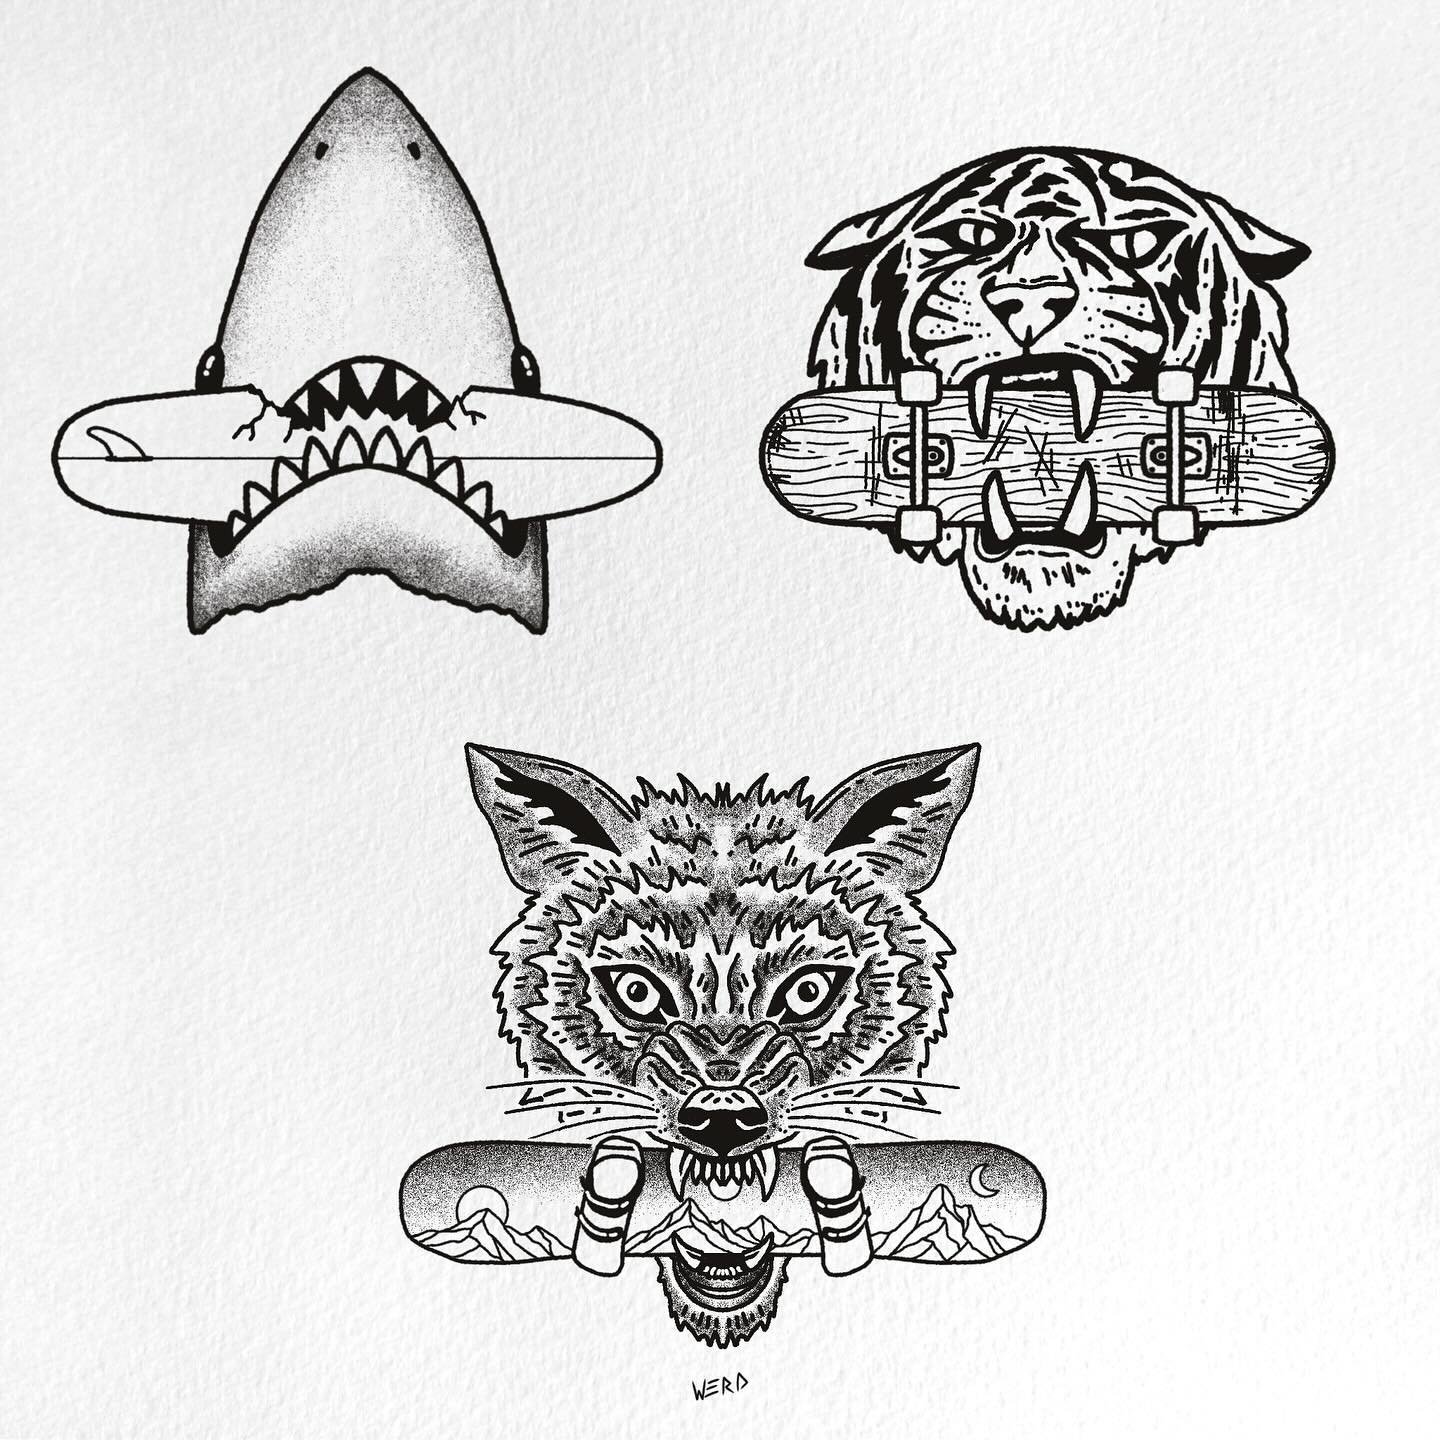 Surf, skate, or snow? 
.
.
.
.
.
If you would like to use any of my designs for a tattoo, please support my work and purchase a Tattoo Certificate from my website. Use the product like on the post or link in my bio. Thanks so much! 
-Drew
.
.
.
#simp